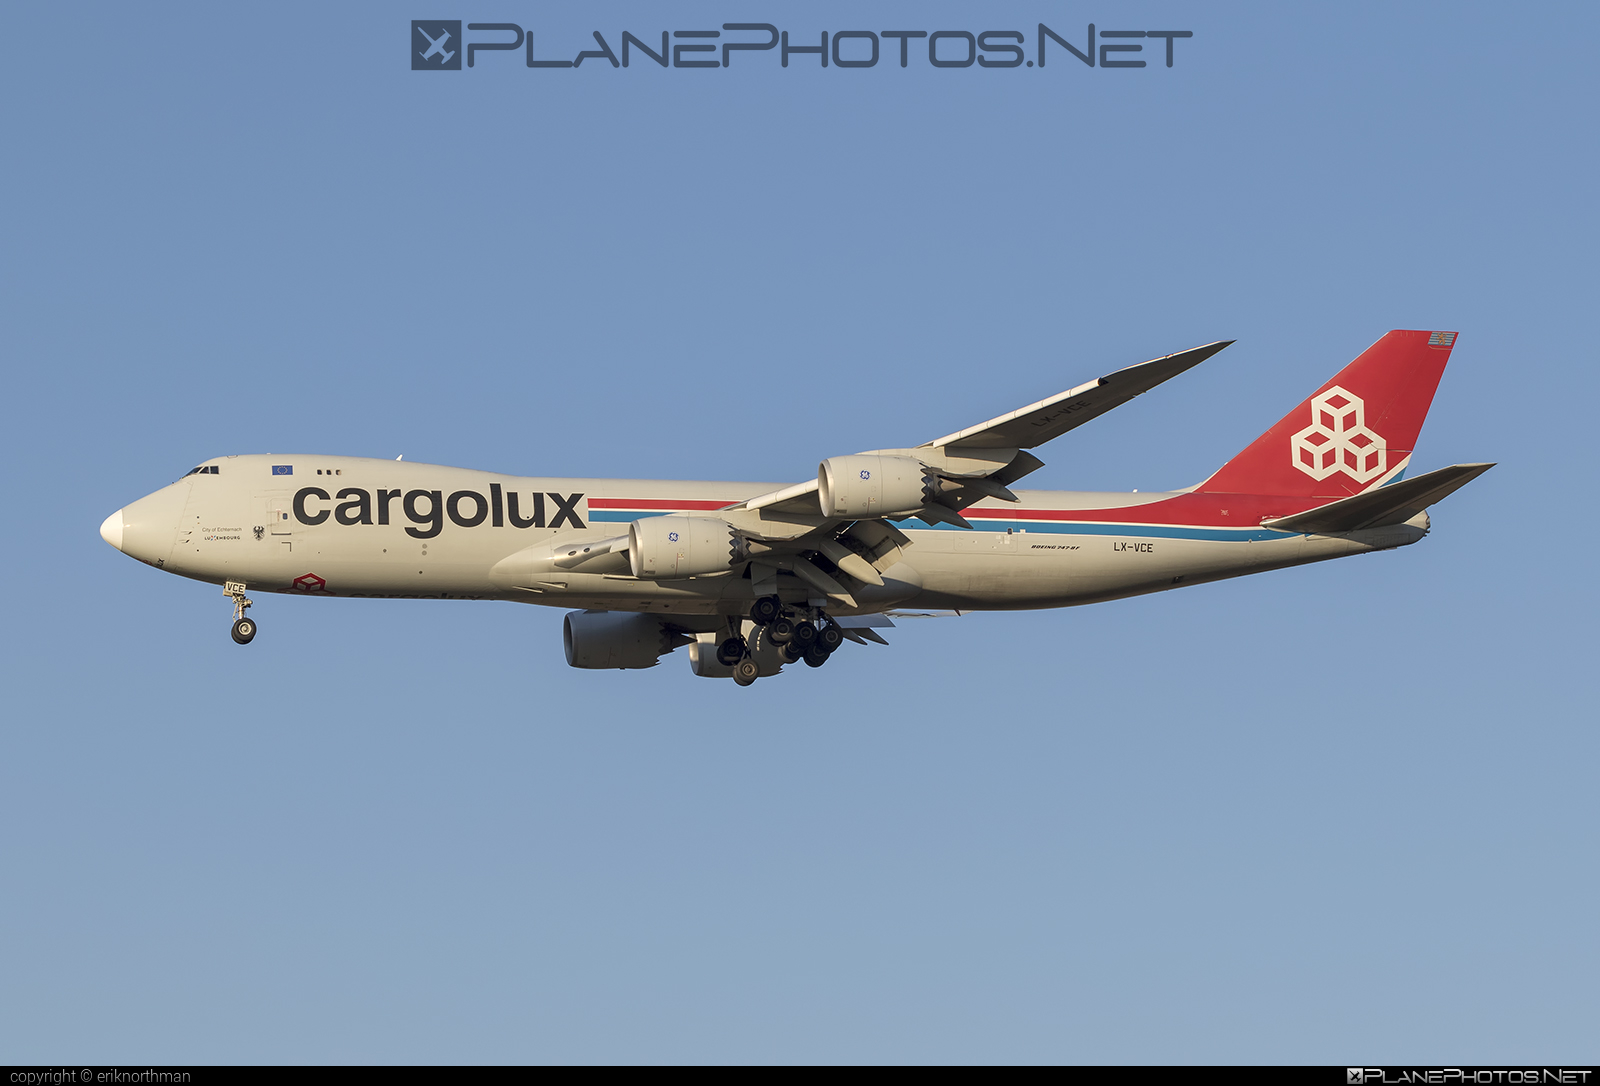 Boeing 747-8F - LX-VCE operated by Cargolux Airlines International #b747 #b747f #b747freighter #boeing #boeing747 #cargolux #jumbo